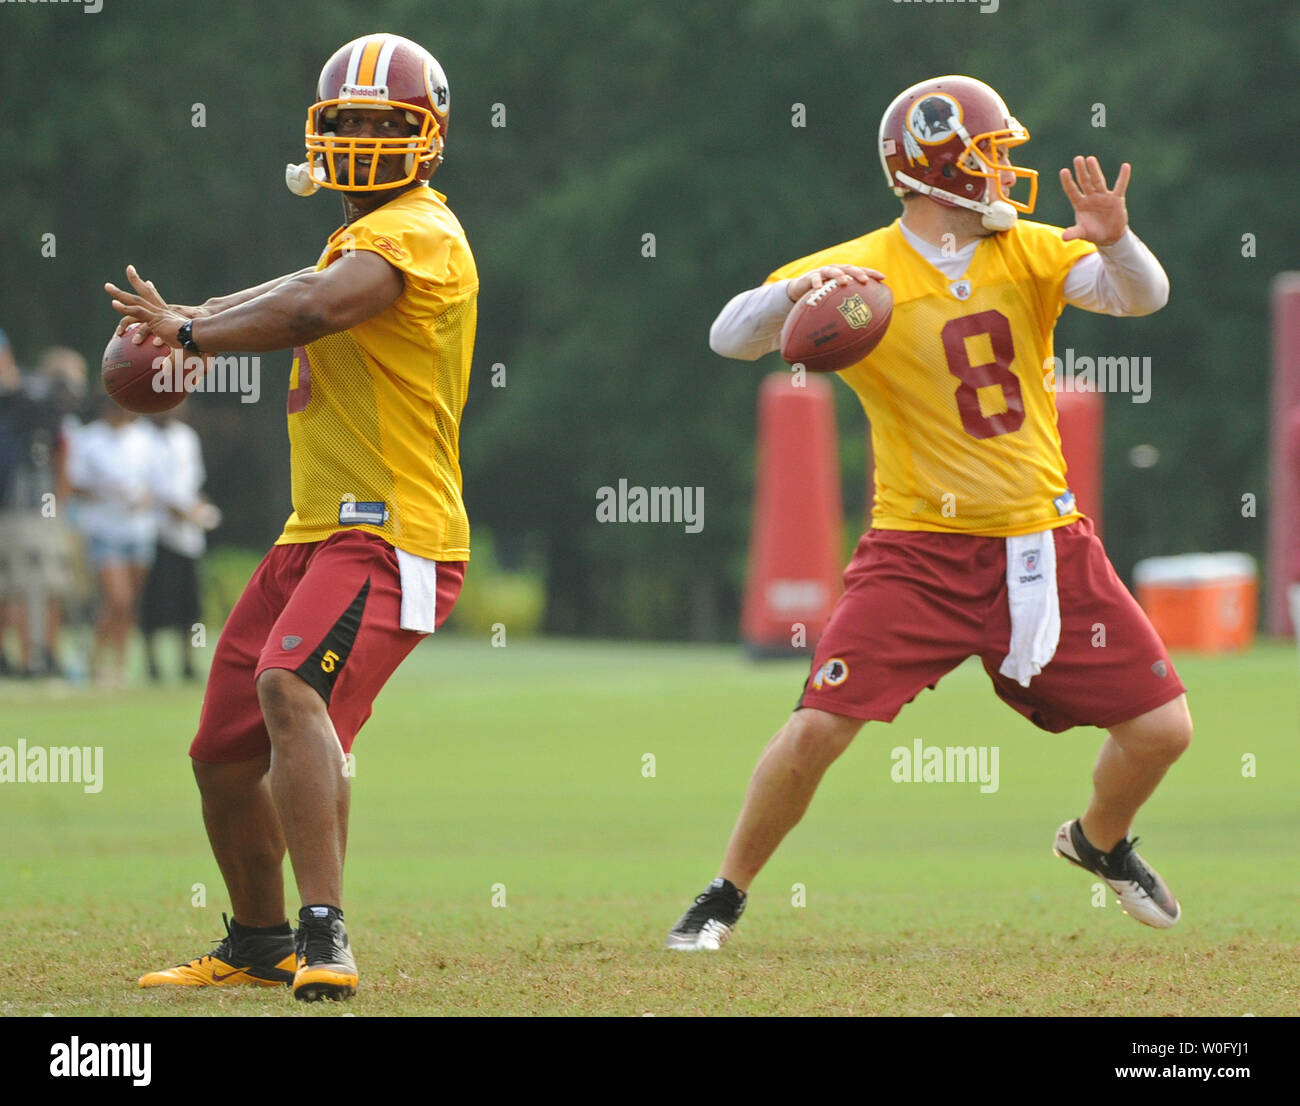 Washington Redskins quarterbacks Donovan McNabb (L) and Rex Grossman participate in a drill during the last day of Redskins training camp at Redskins Park in Ashburn, Virginia, August 19, 2010. UPI/Kevin Dietsch Stock Photo